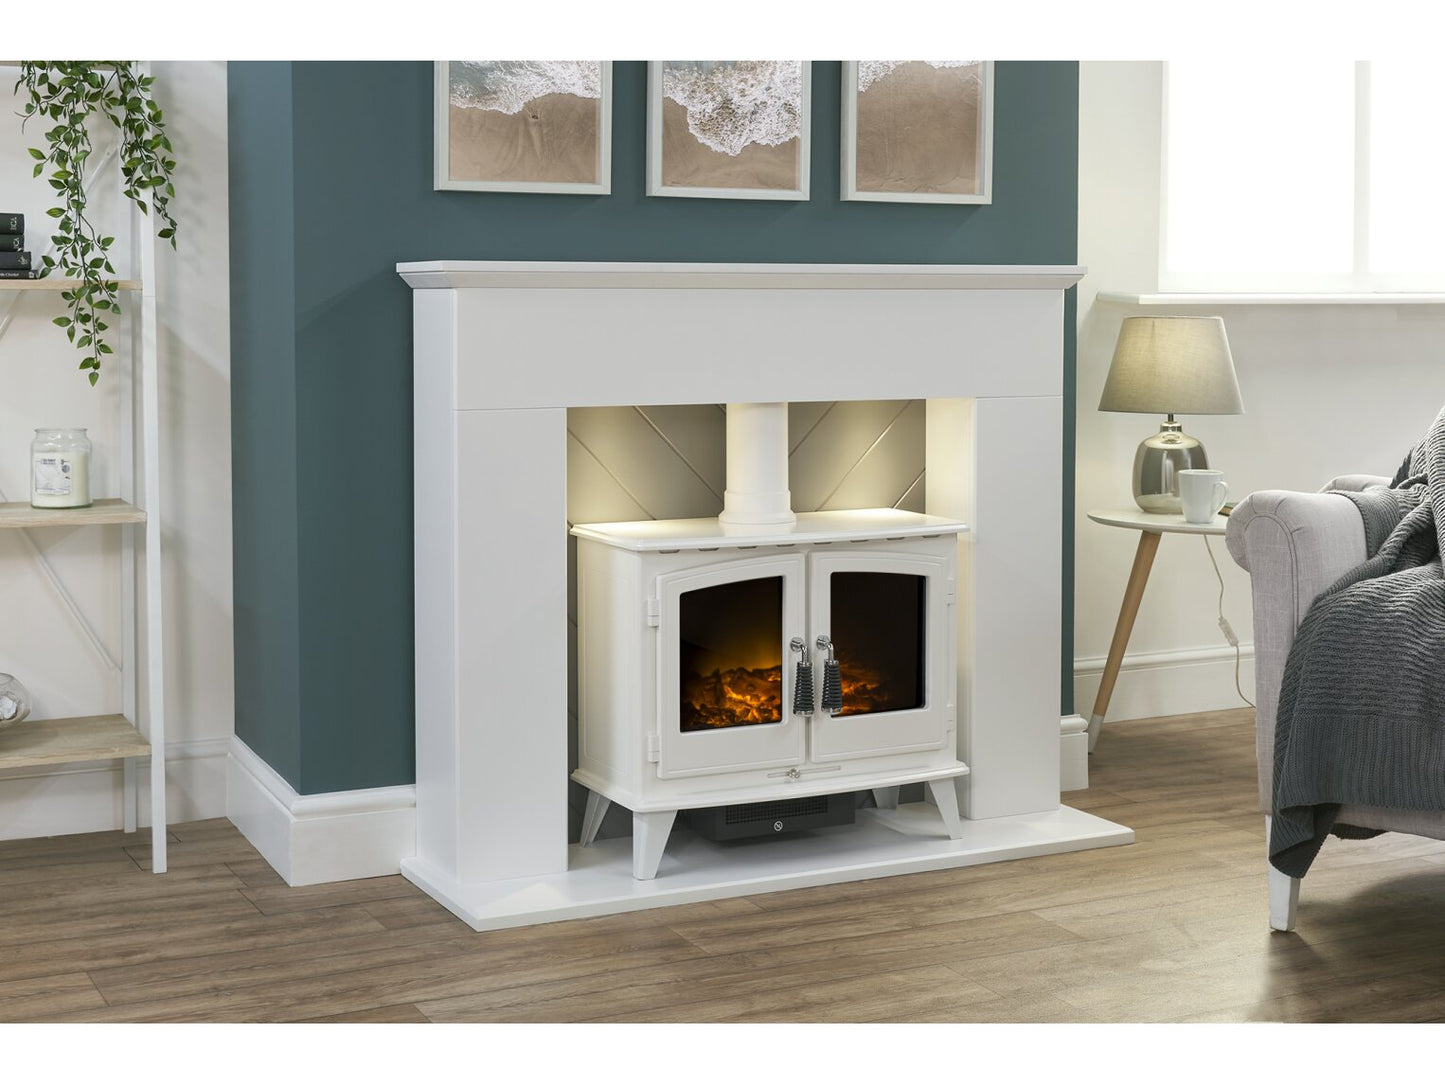 Adam Corinth Stove Fireplace with Downlights & Woodhouse Electric Stove in Pure White, 48 Inch 25447 Pure White & Grey